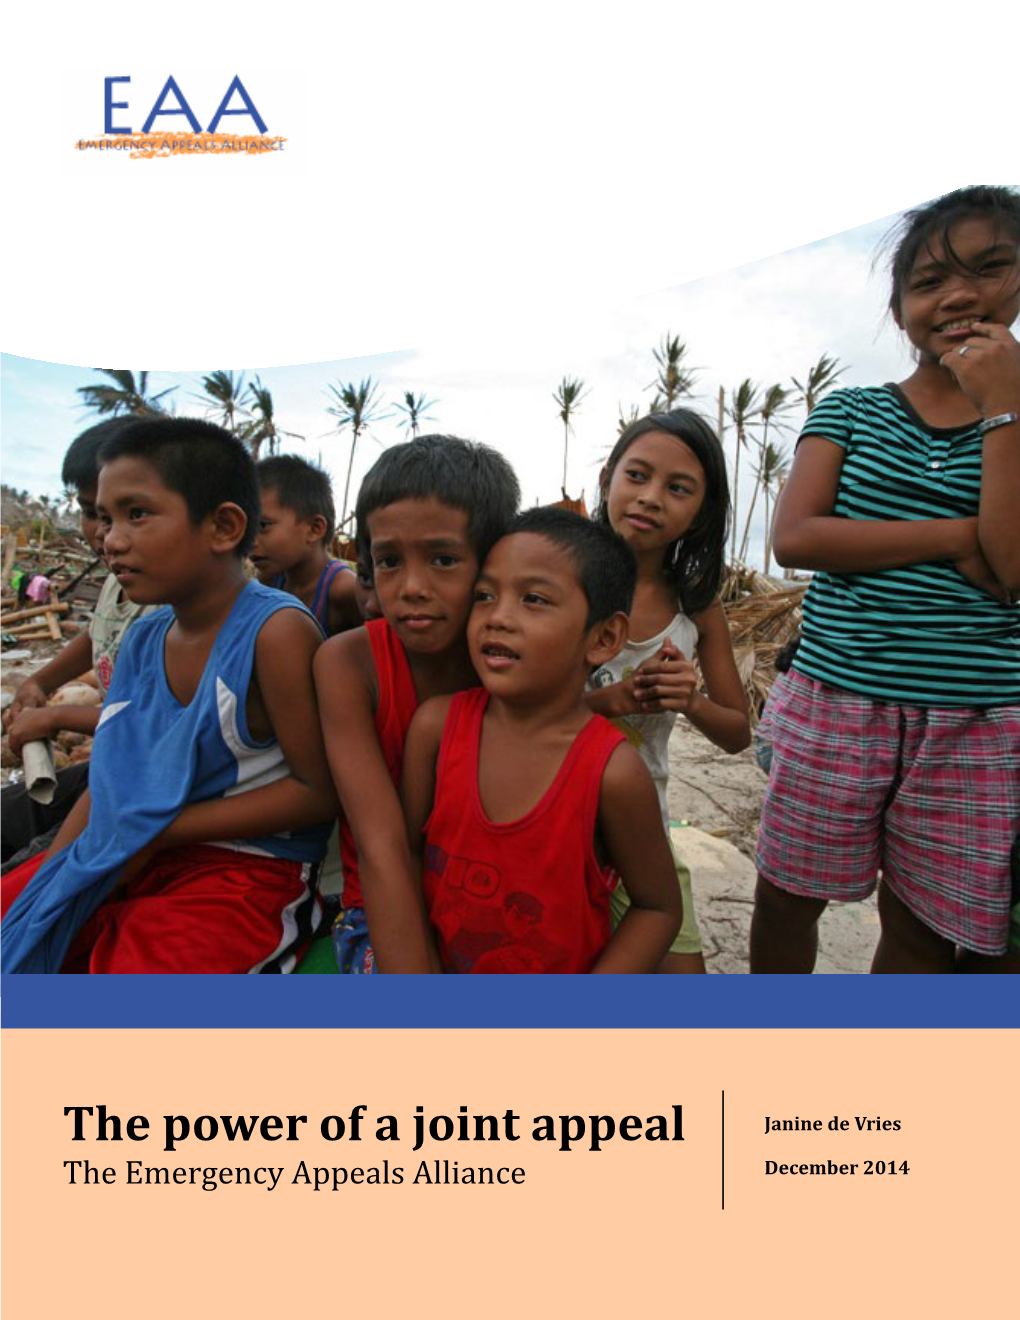 The Power of a Joint Appeal Janine De Vries the Emergency Appeals Alliance December 2014 Content